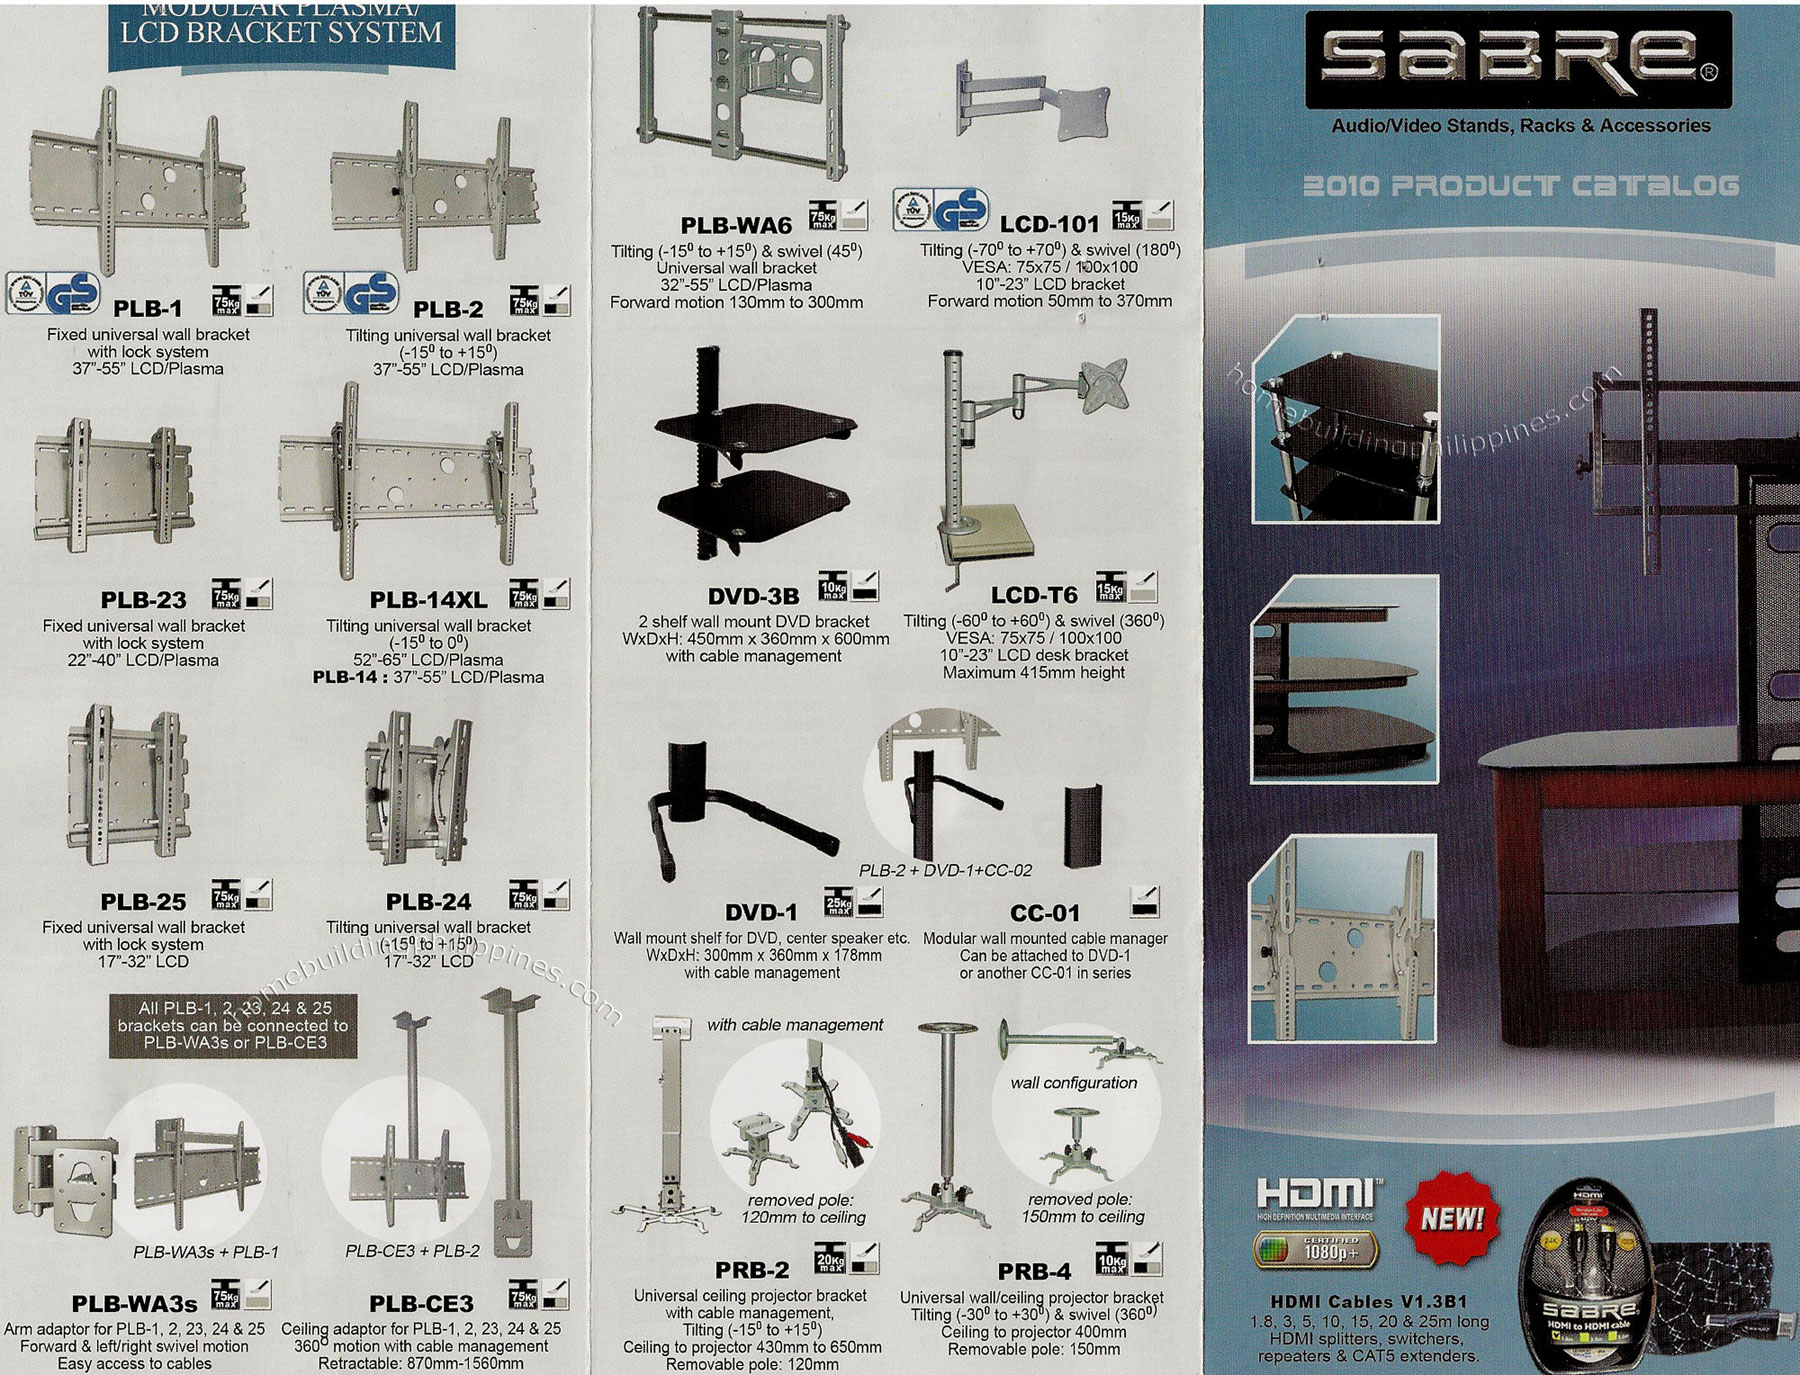 Sabre Audio/Video Stands, Racks and Accessories; Modular TV Bracket System